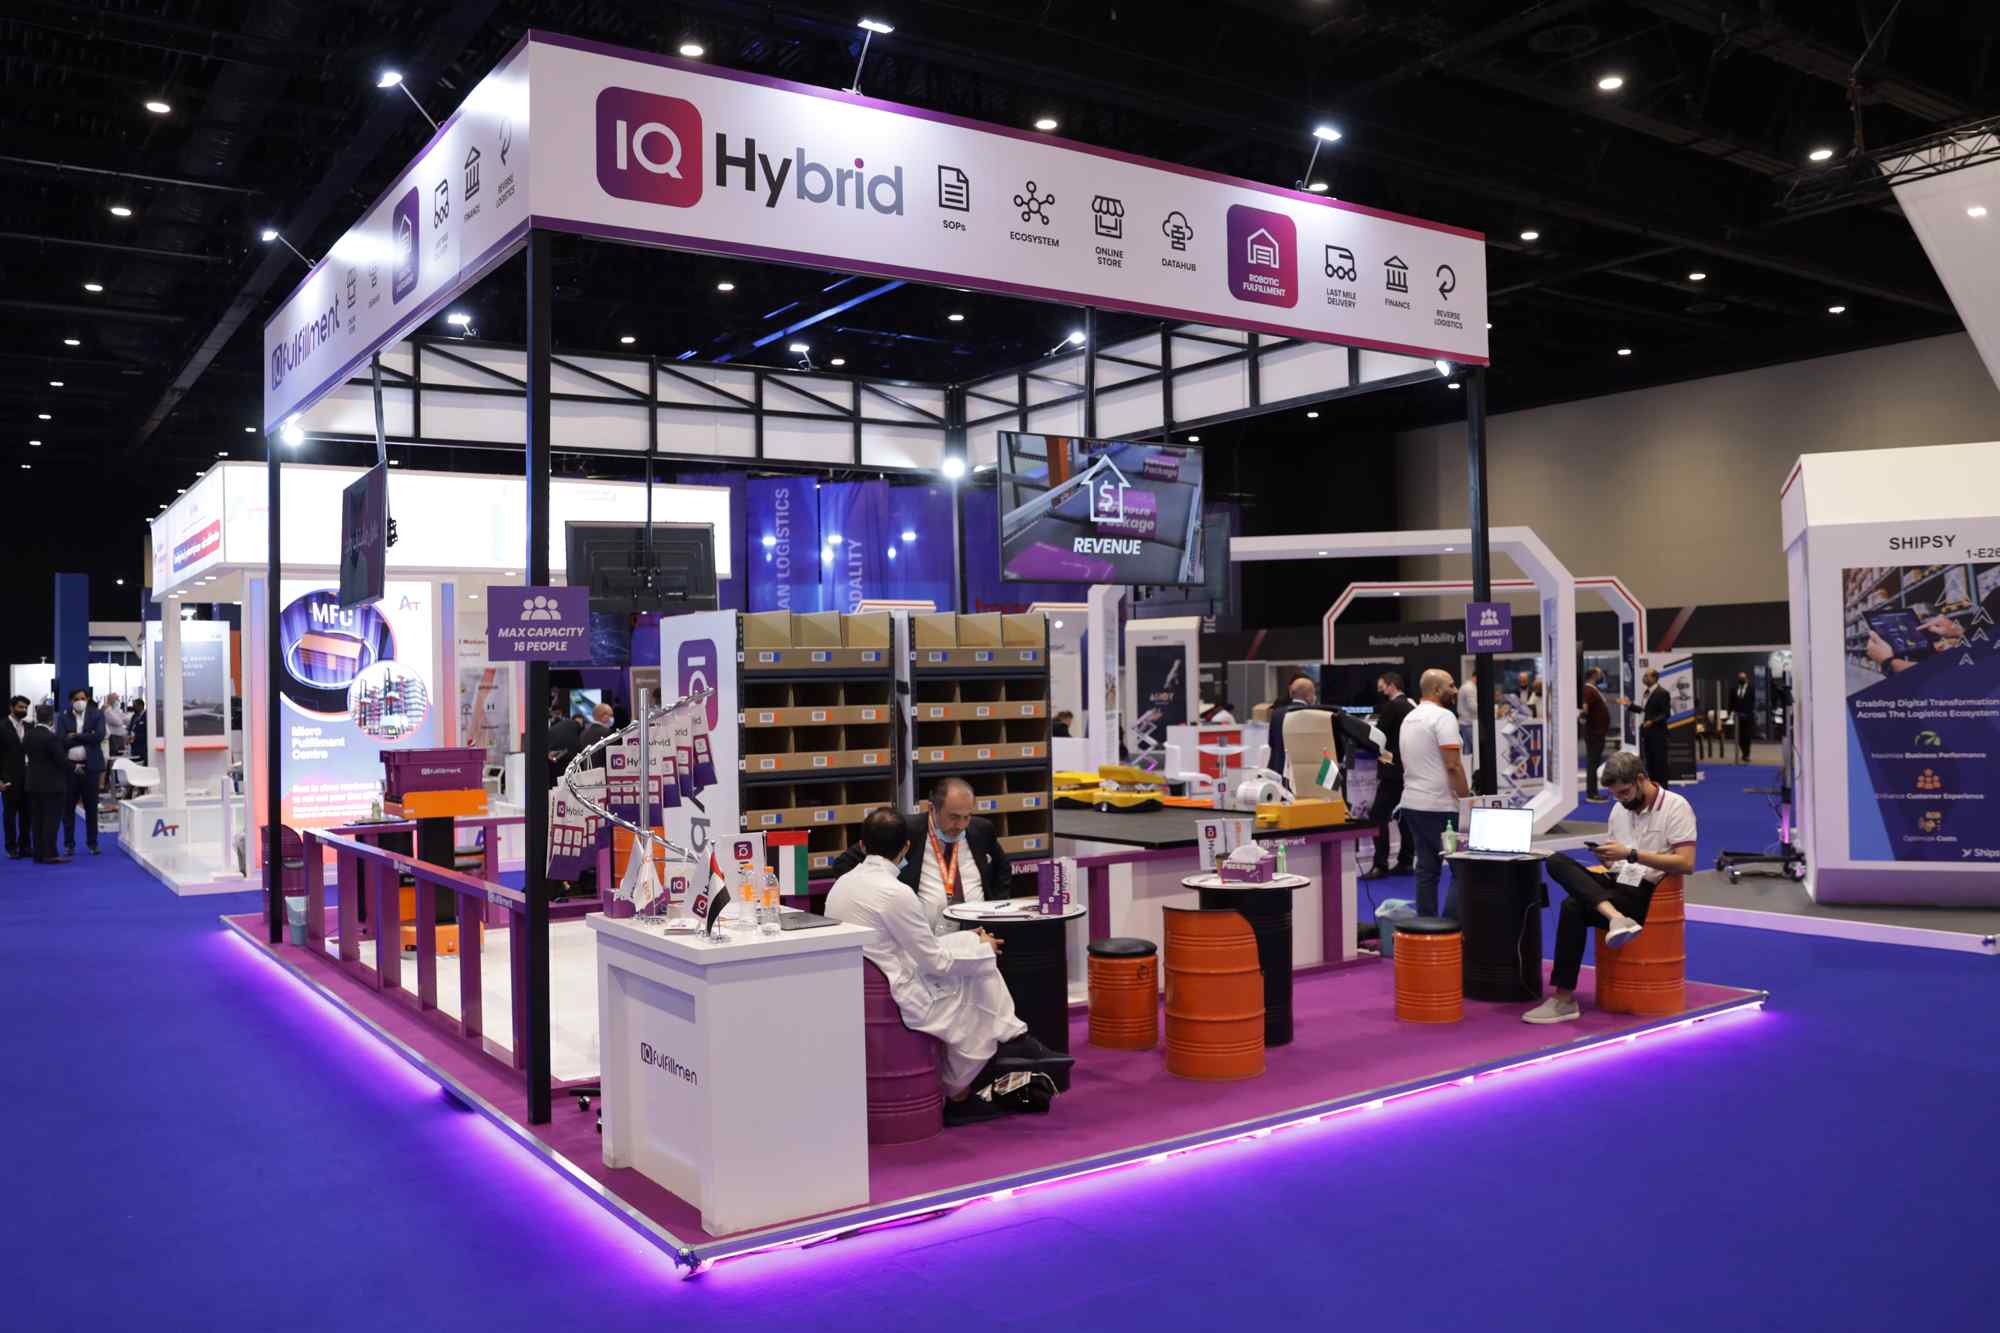 IQ Fulfillment Expands Turnkey Solutions Through The Launch Of IQ Hybrid At Hypermotion Dubai At Expo 2020